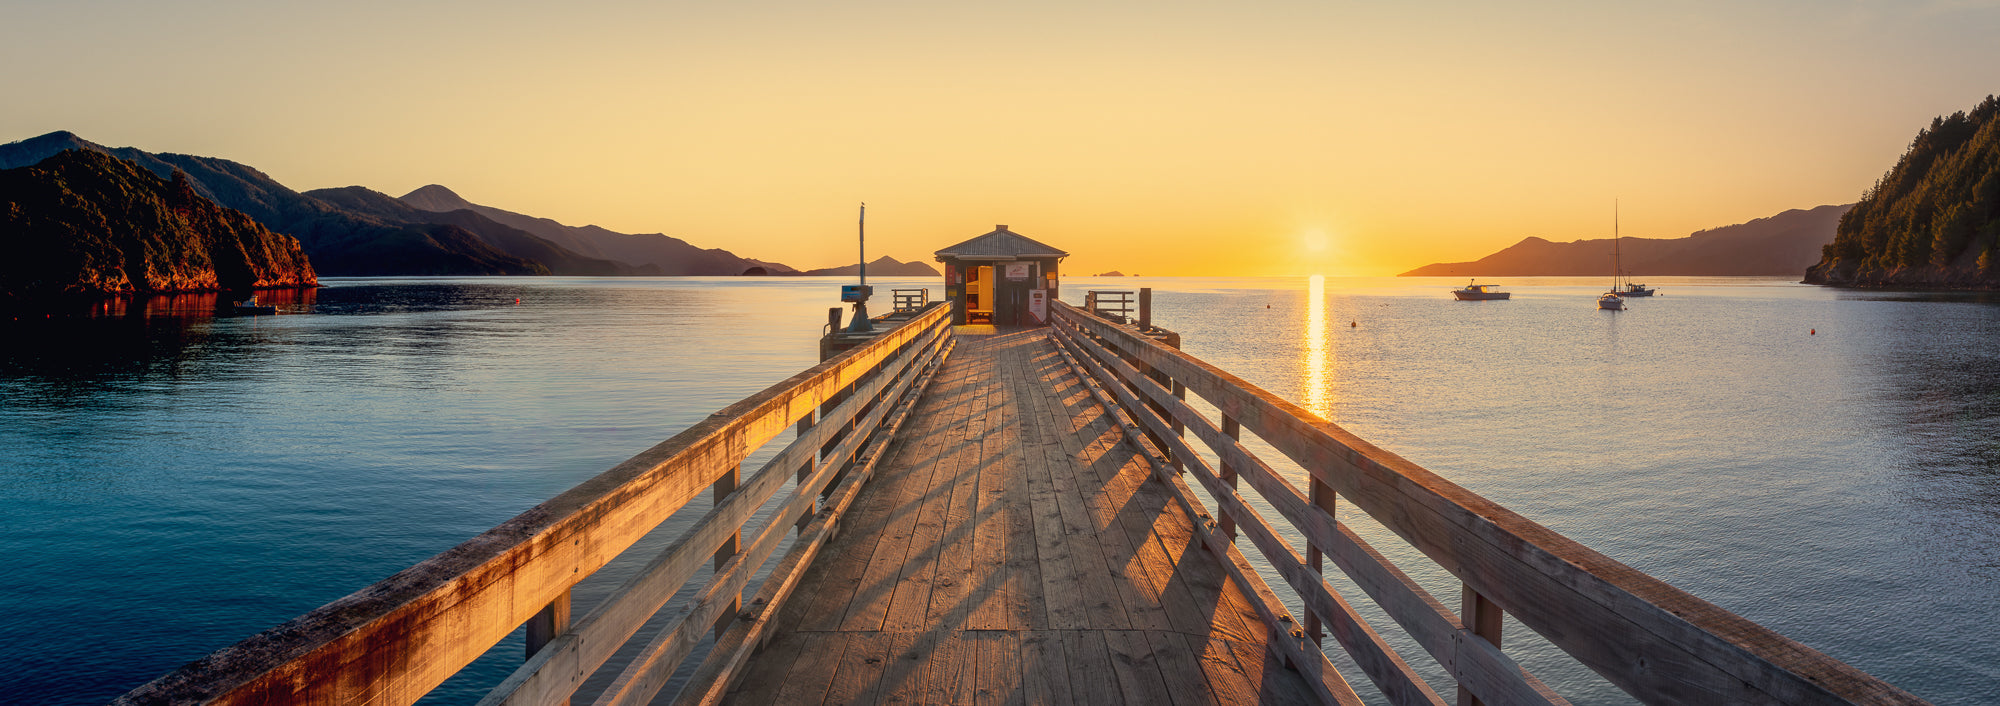 Journey to Sunrise: French Pass Pier